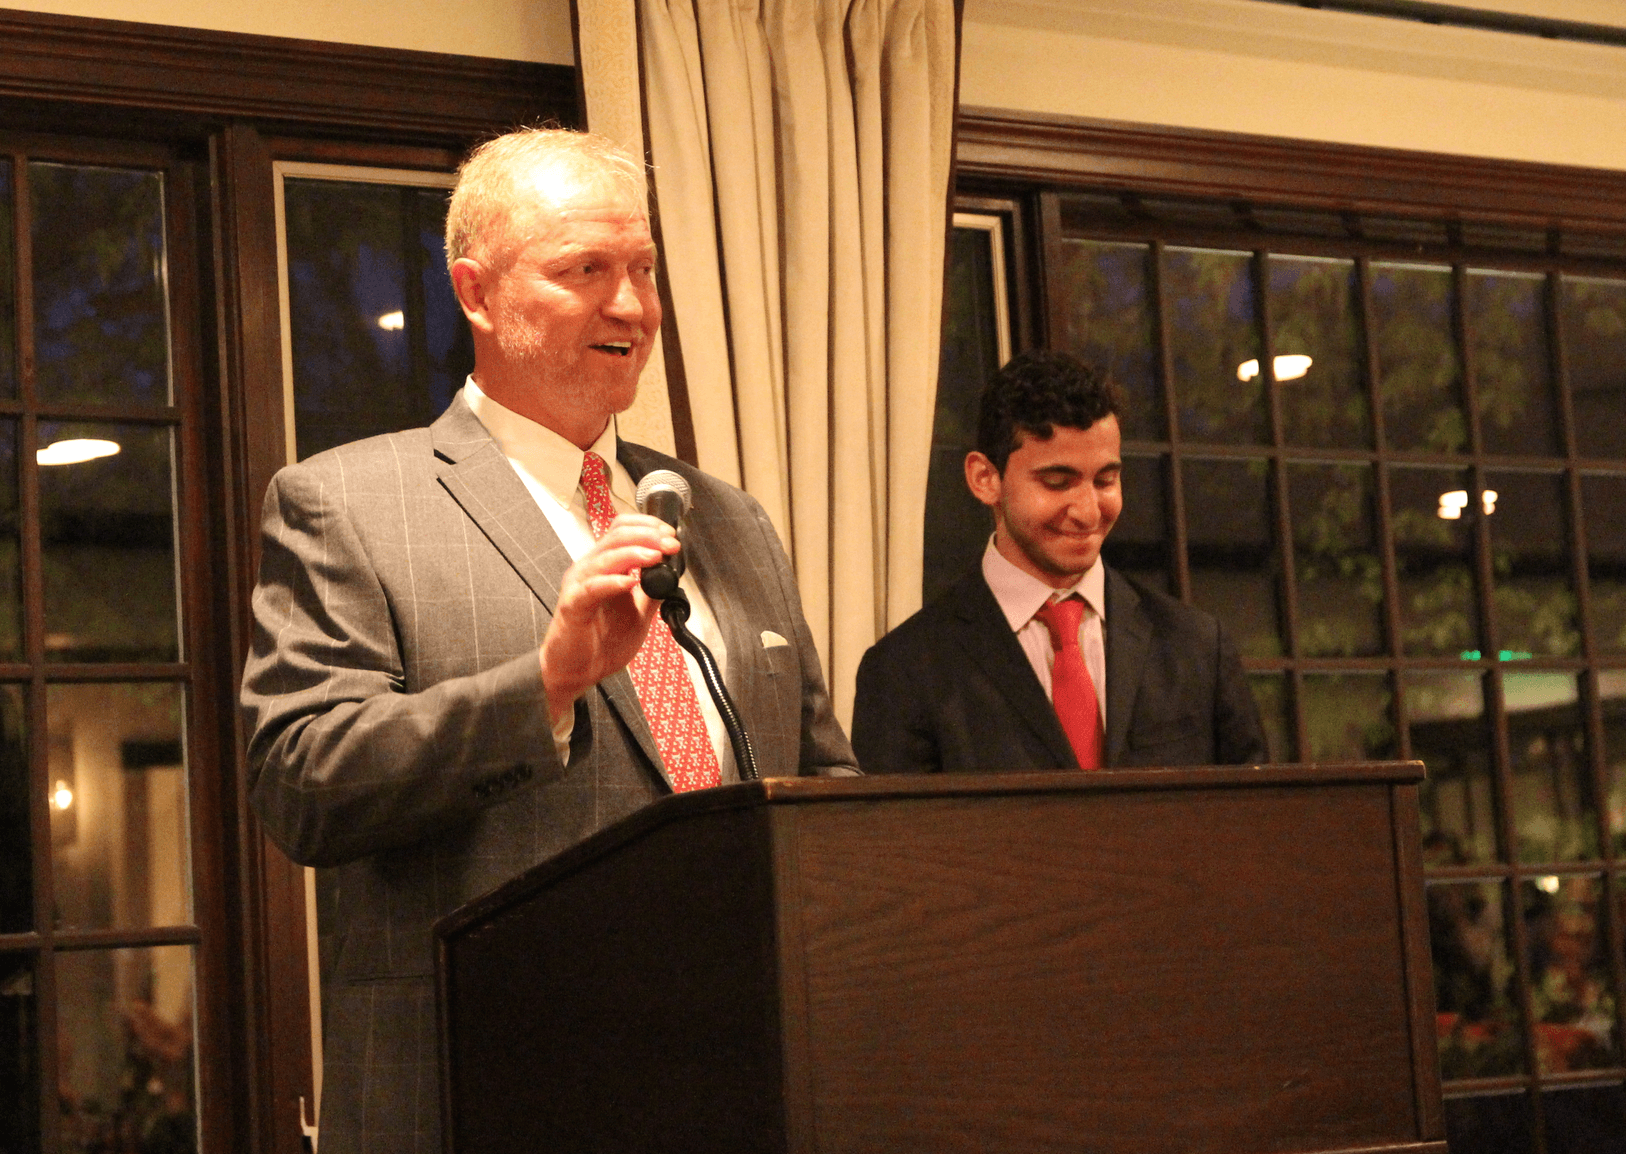 Joe Kelly kicked off his campaign for Greenwich Selectman at the Milbrook Club. May 2, 2019 Photo: Leslie Yager